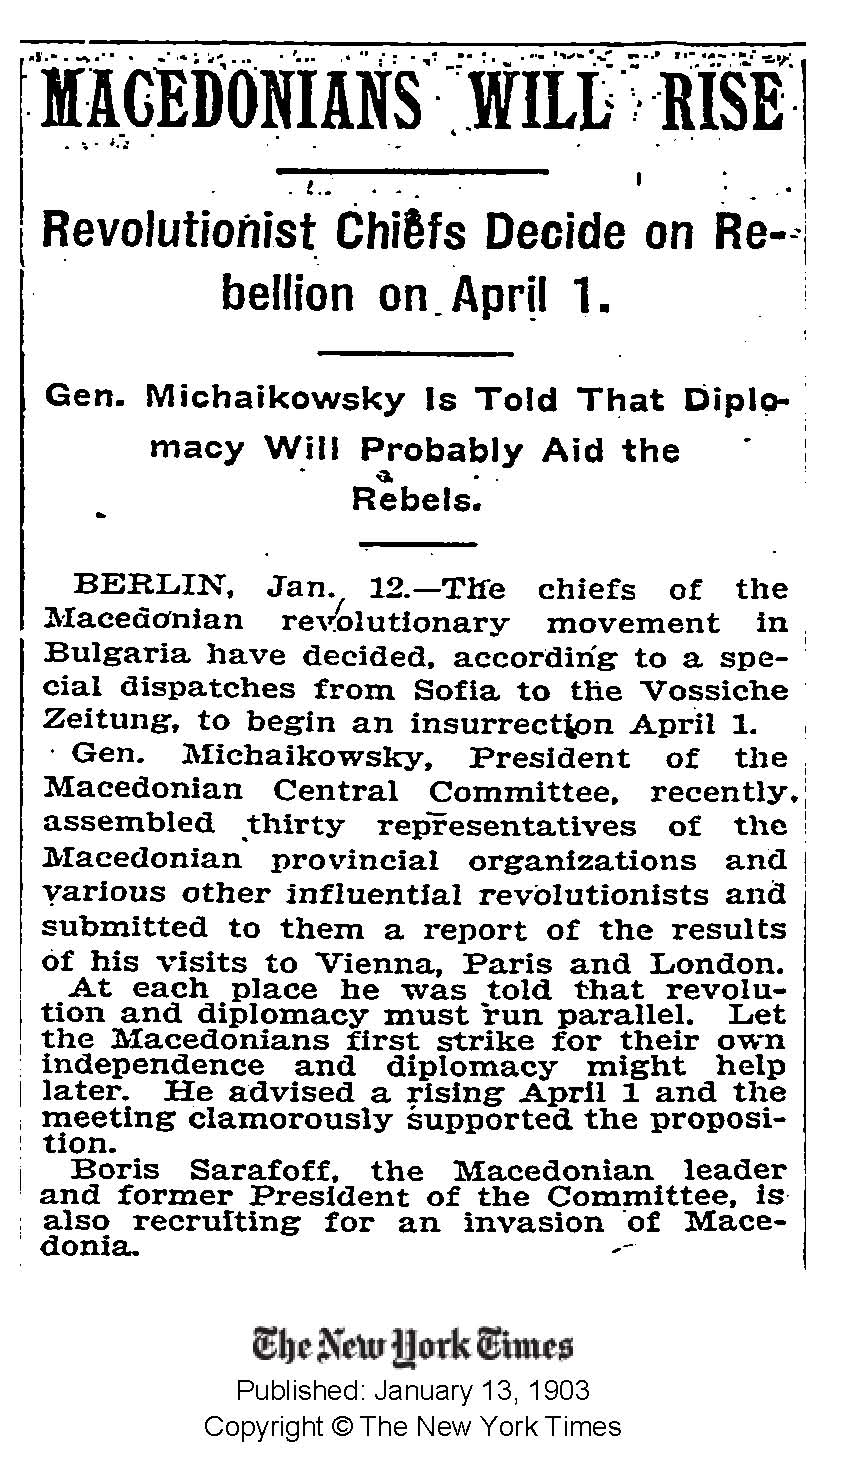 1903.01.13_The New York Times - Macedonians will rise